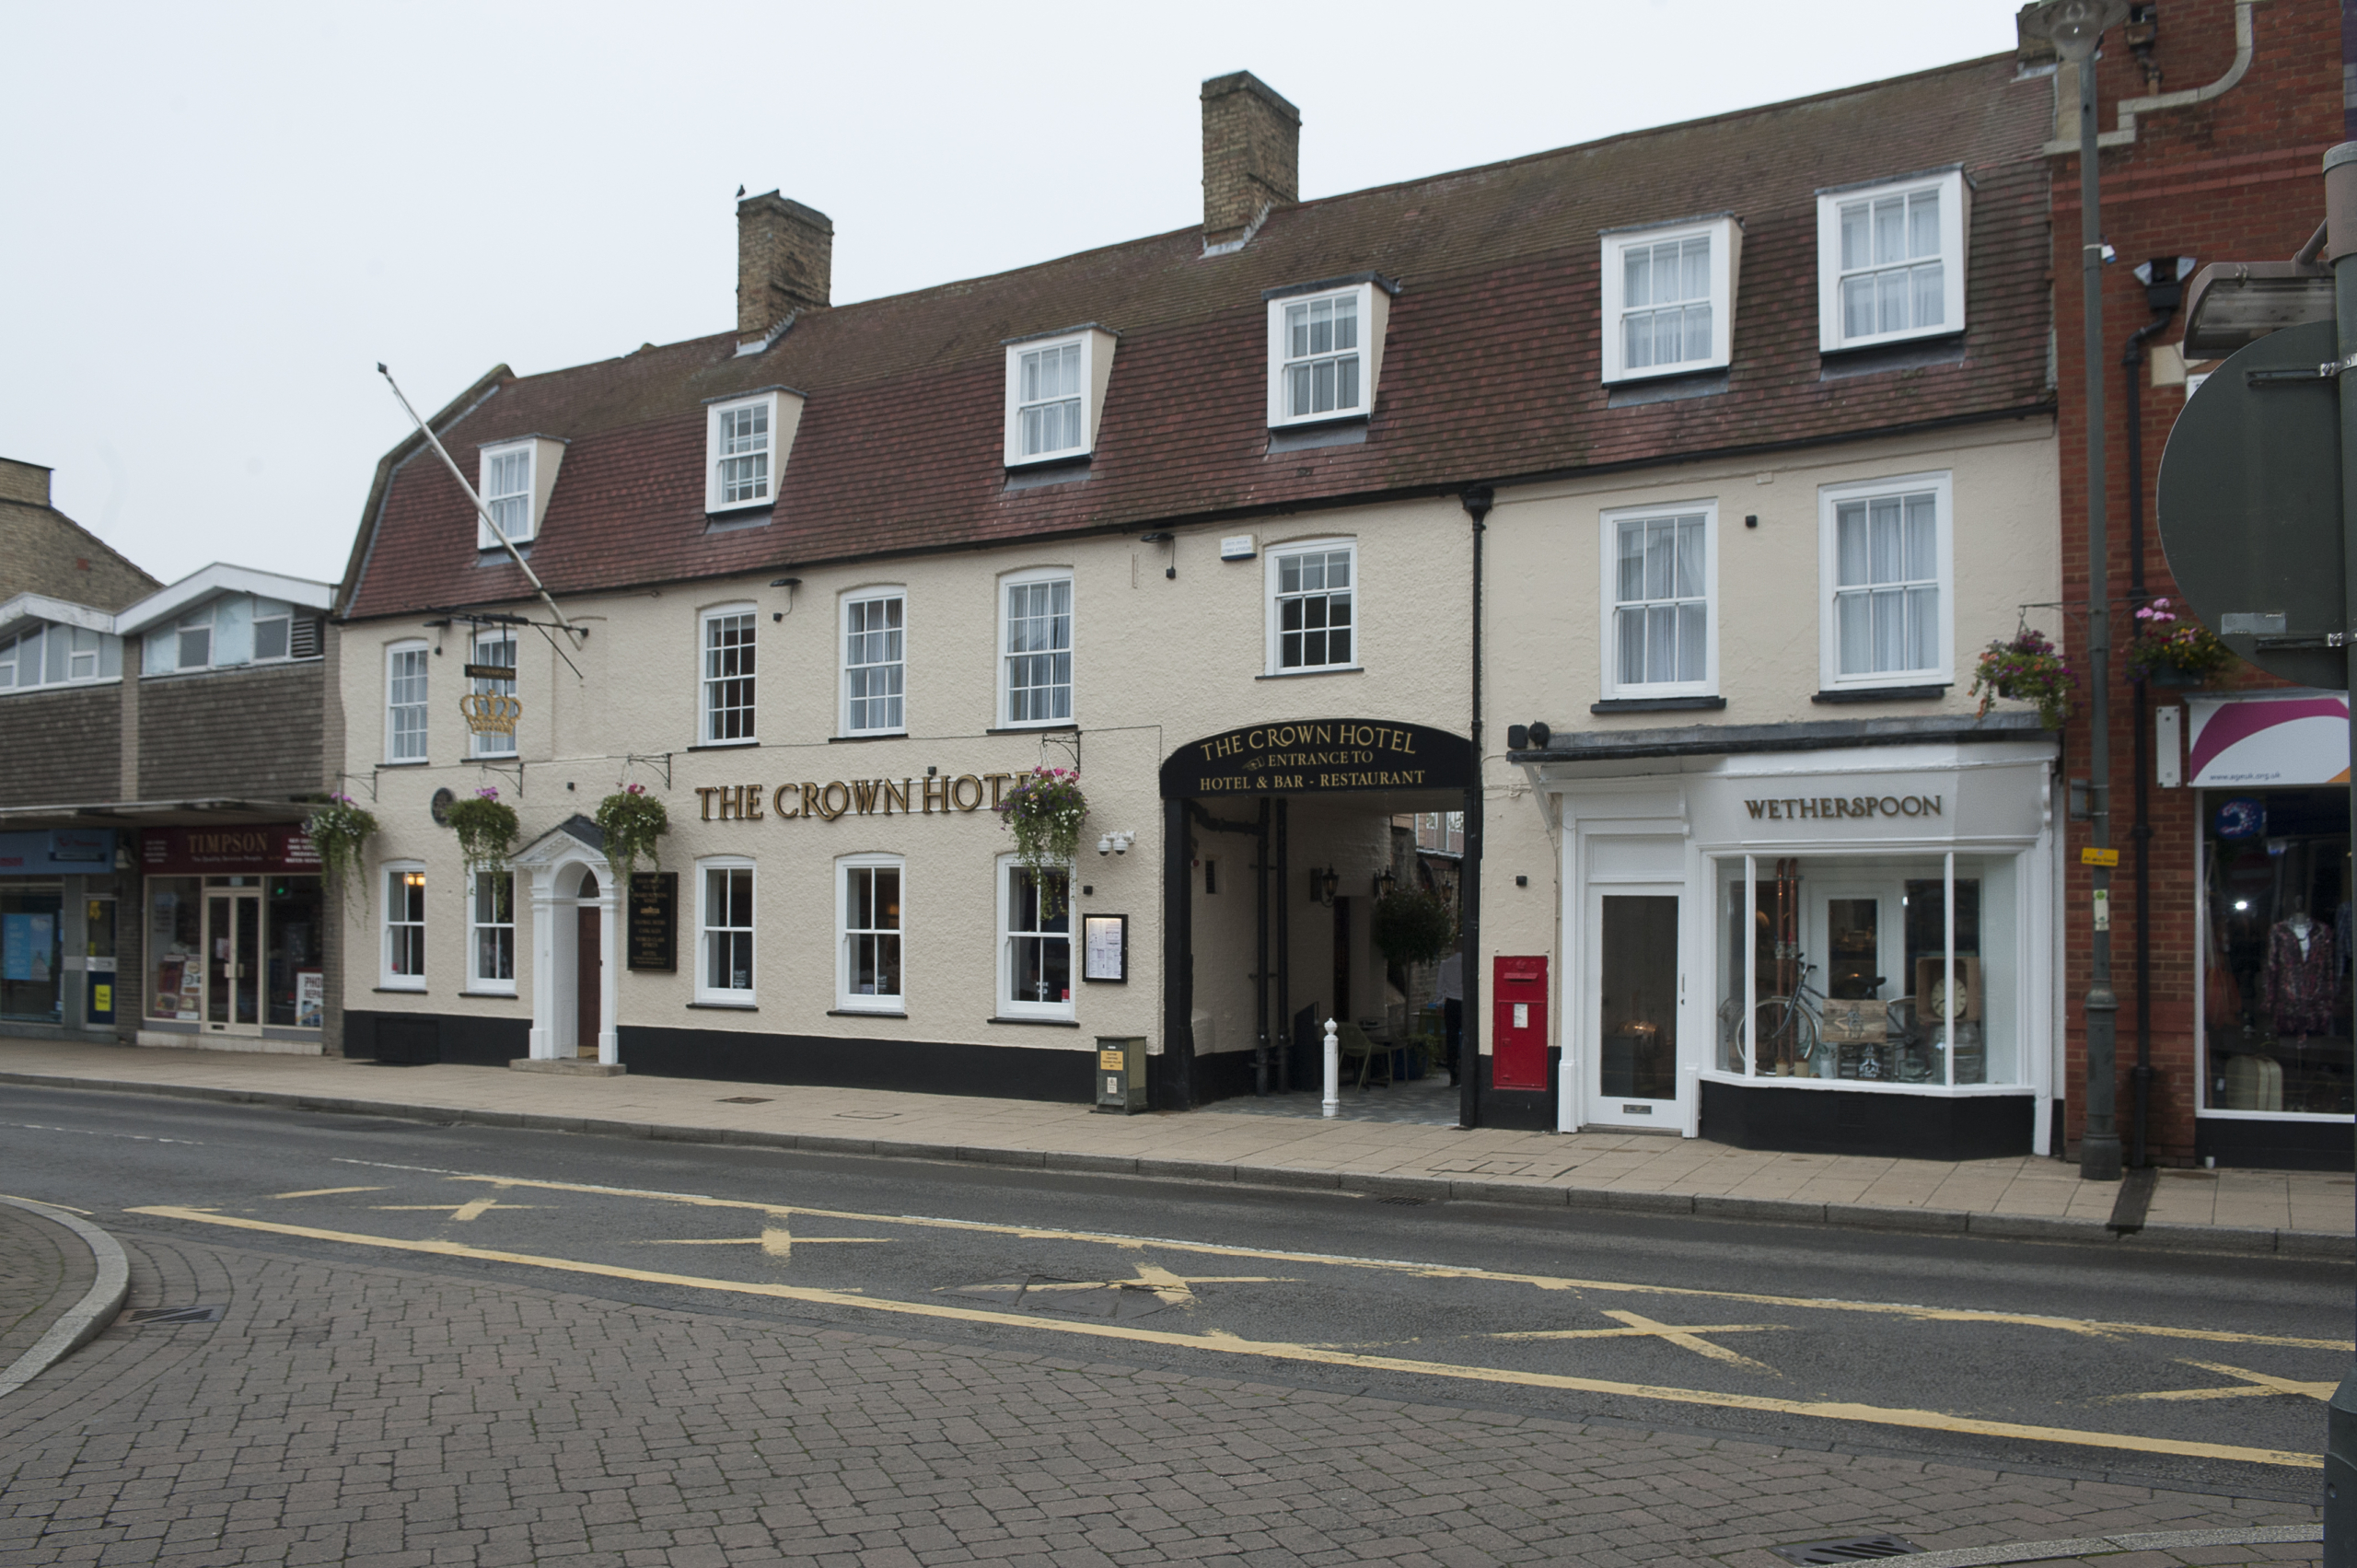 The Crown Hotel, Biggleswade external view from street